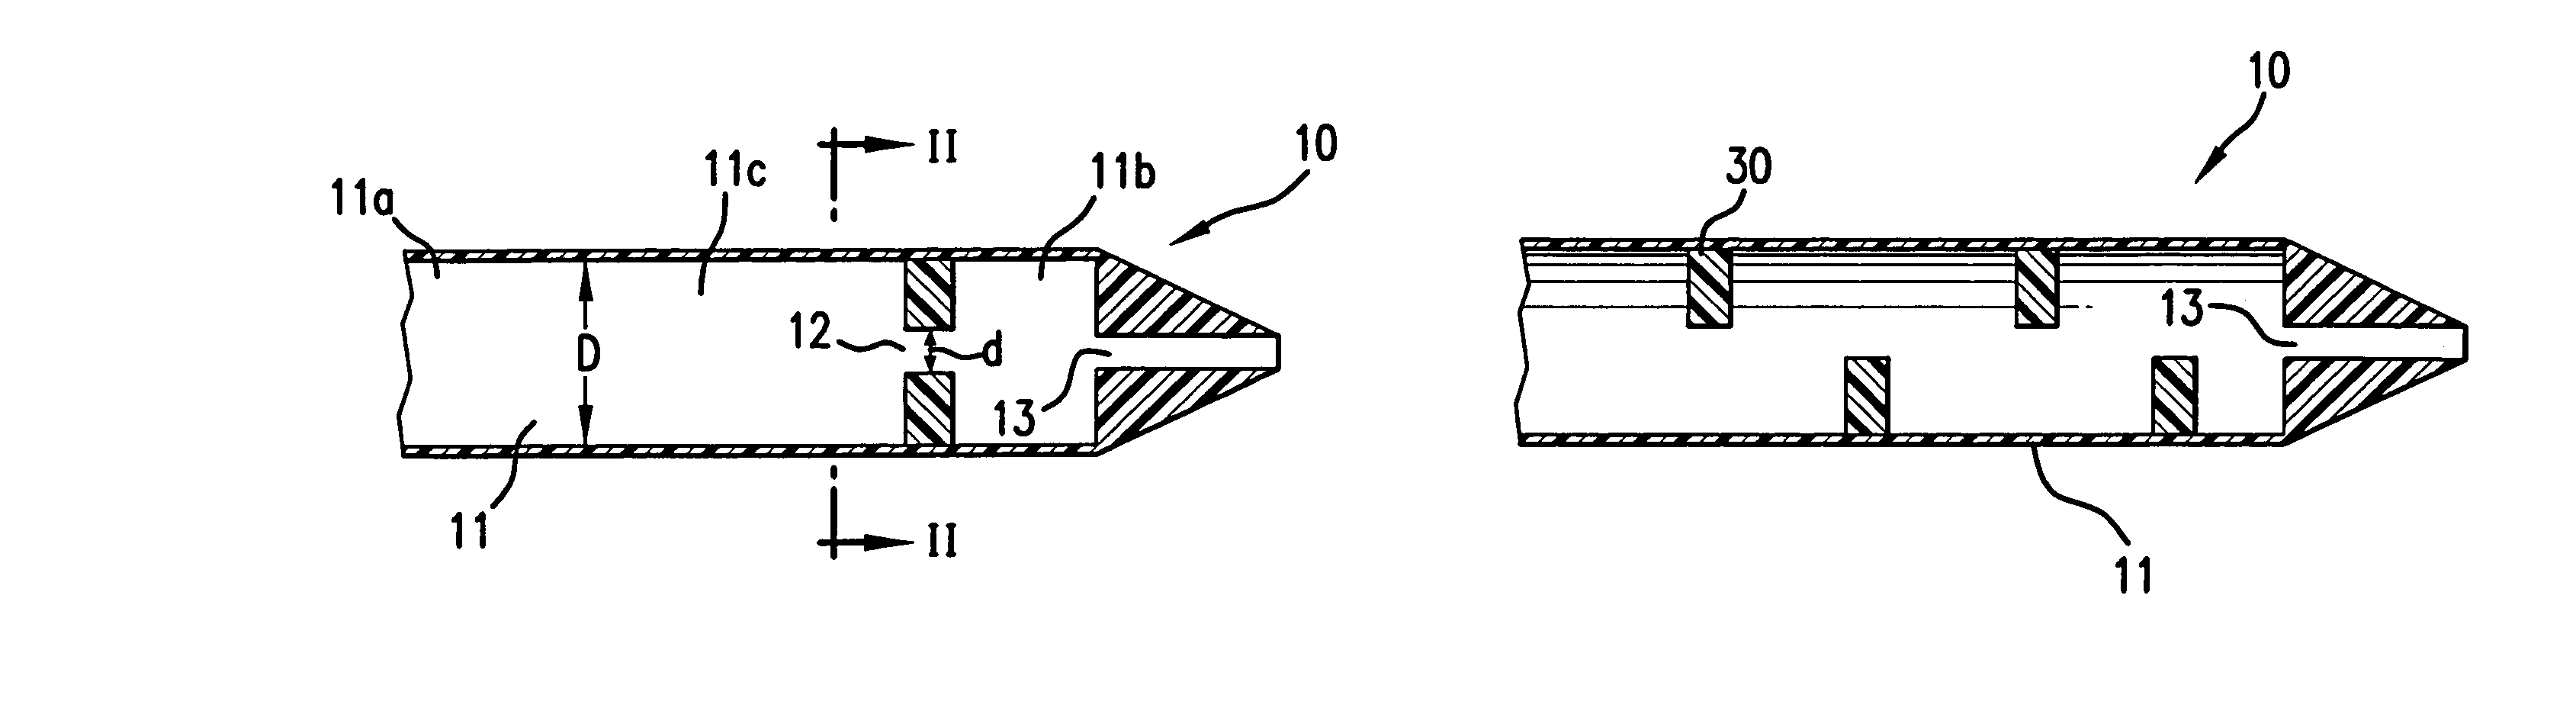 Device and method for direct delivery of a therapeutic using non-newtonian fluids